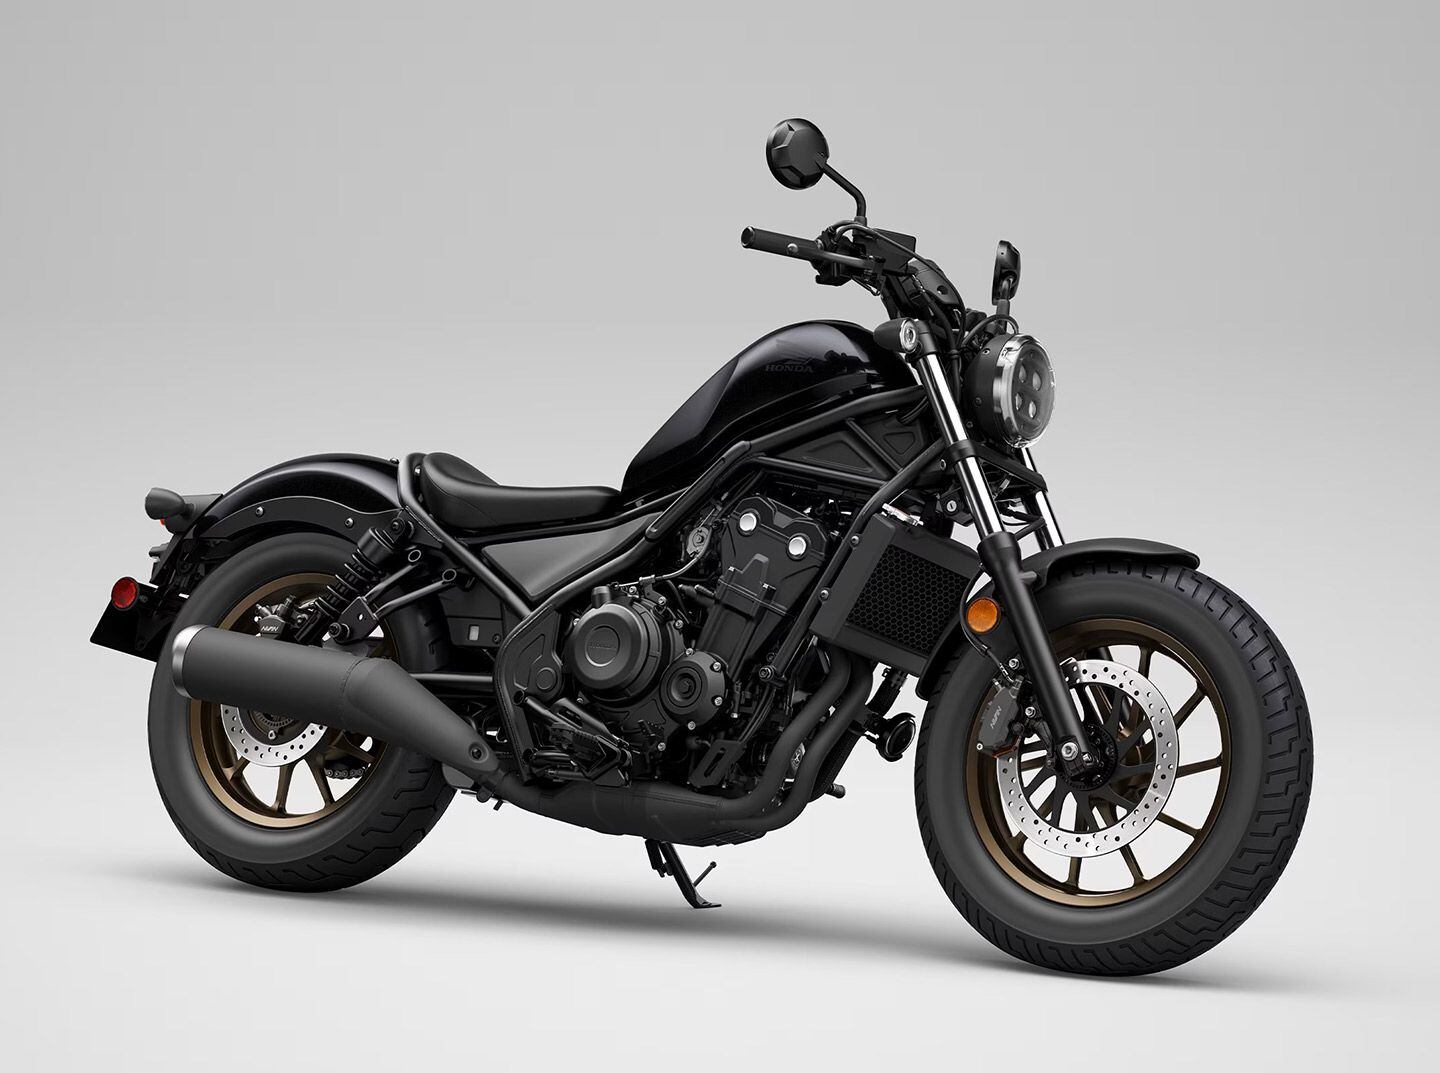 You’ll find Honda’s Rebel 500 on these lists almost every year, thanks to a smooth, torquey parallel-twin engine, a robust set of features, and great styling.